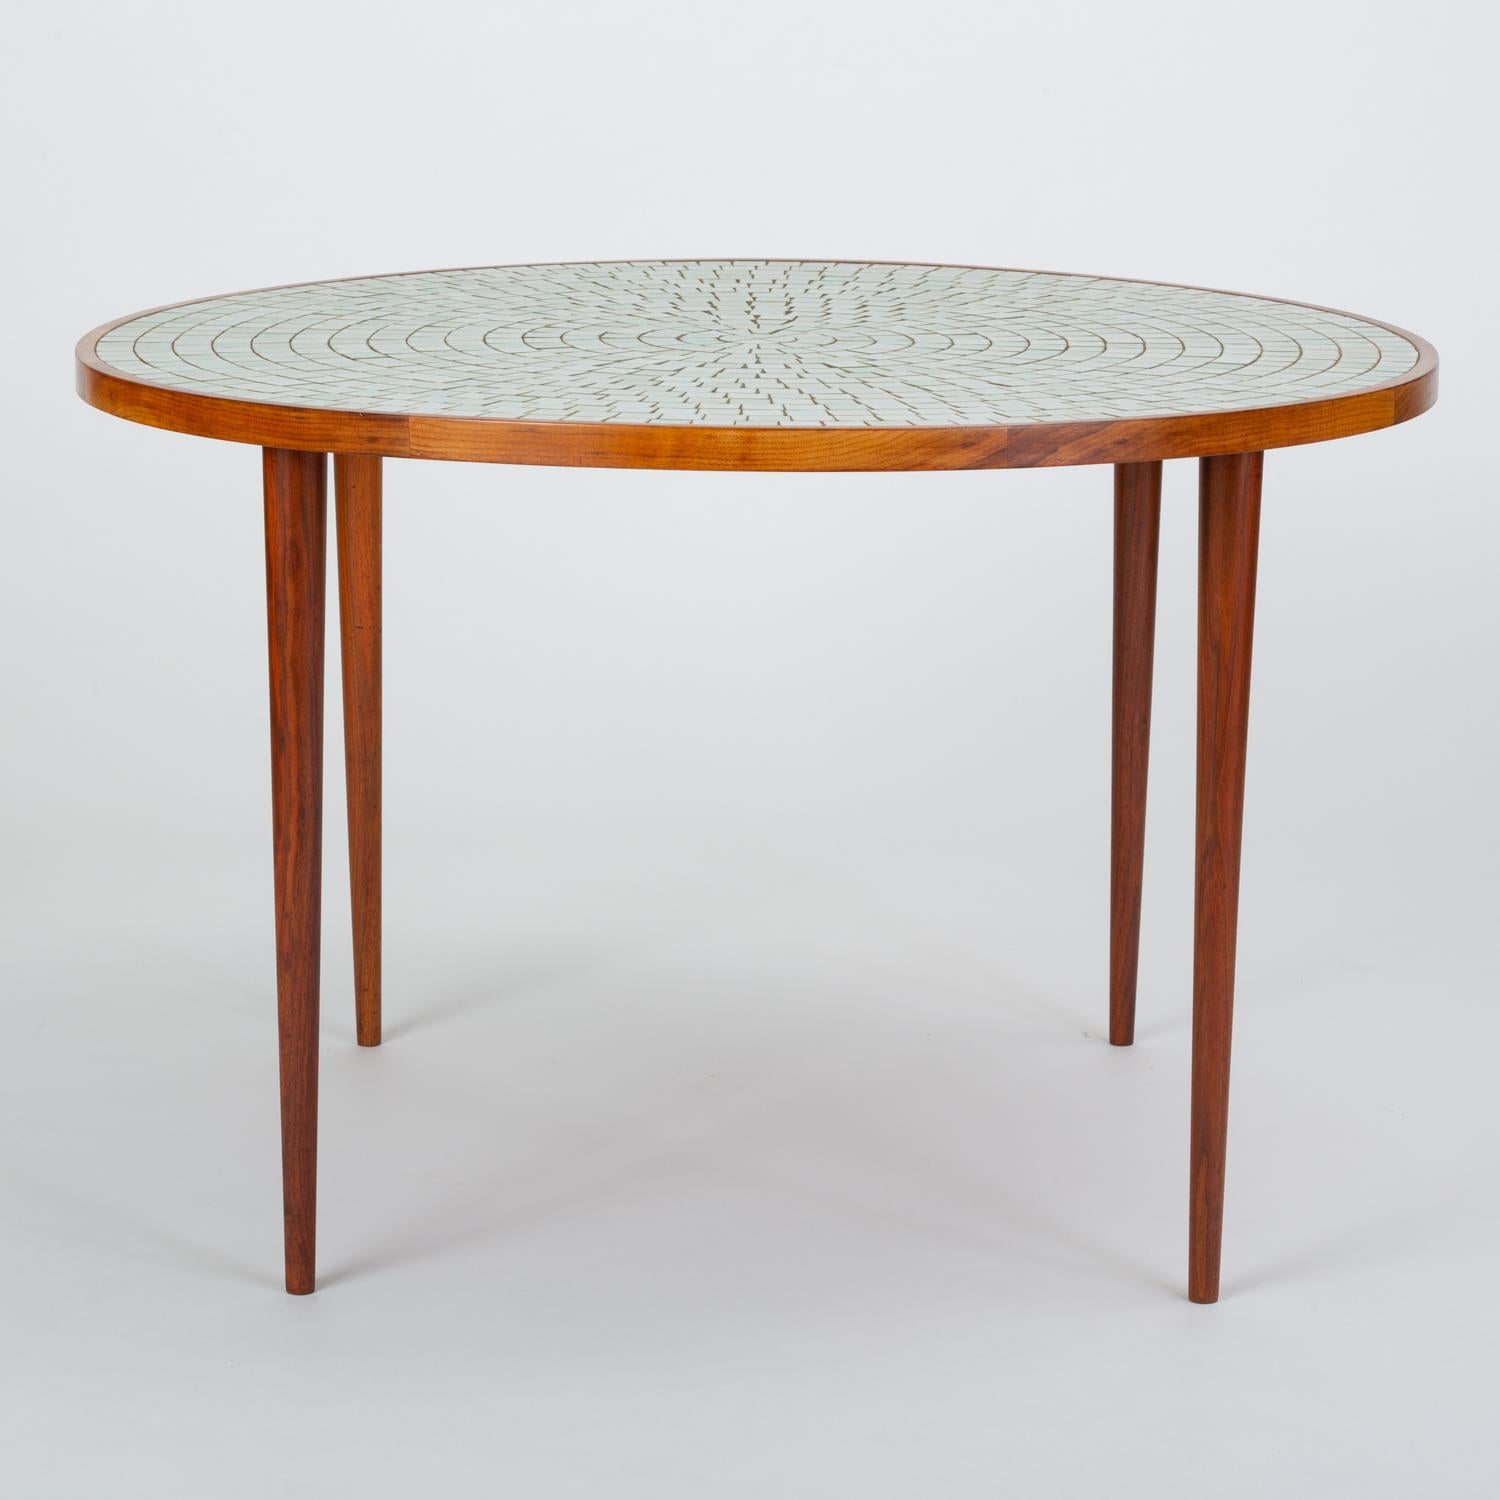 A round dining table from designer husband-and-wife team, Gordon and Jane Martz for their family company Marshal Studios. The table has a walnut frame and tapered dowel legs in matching walnut. The tabletop is inlaid with white ceramic tiles that